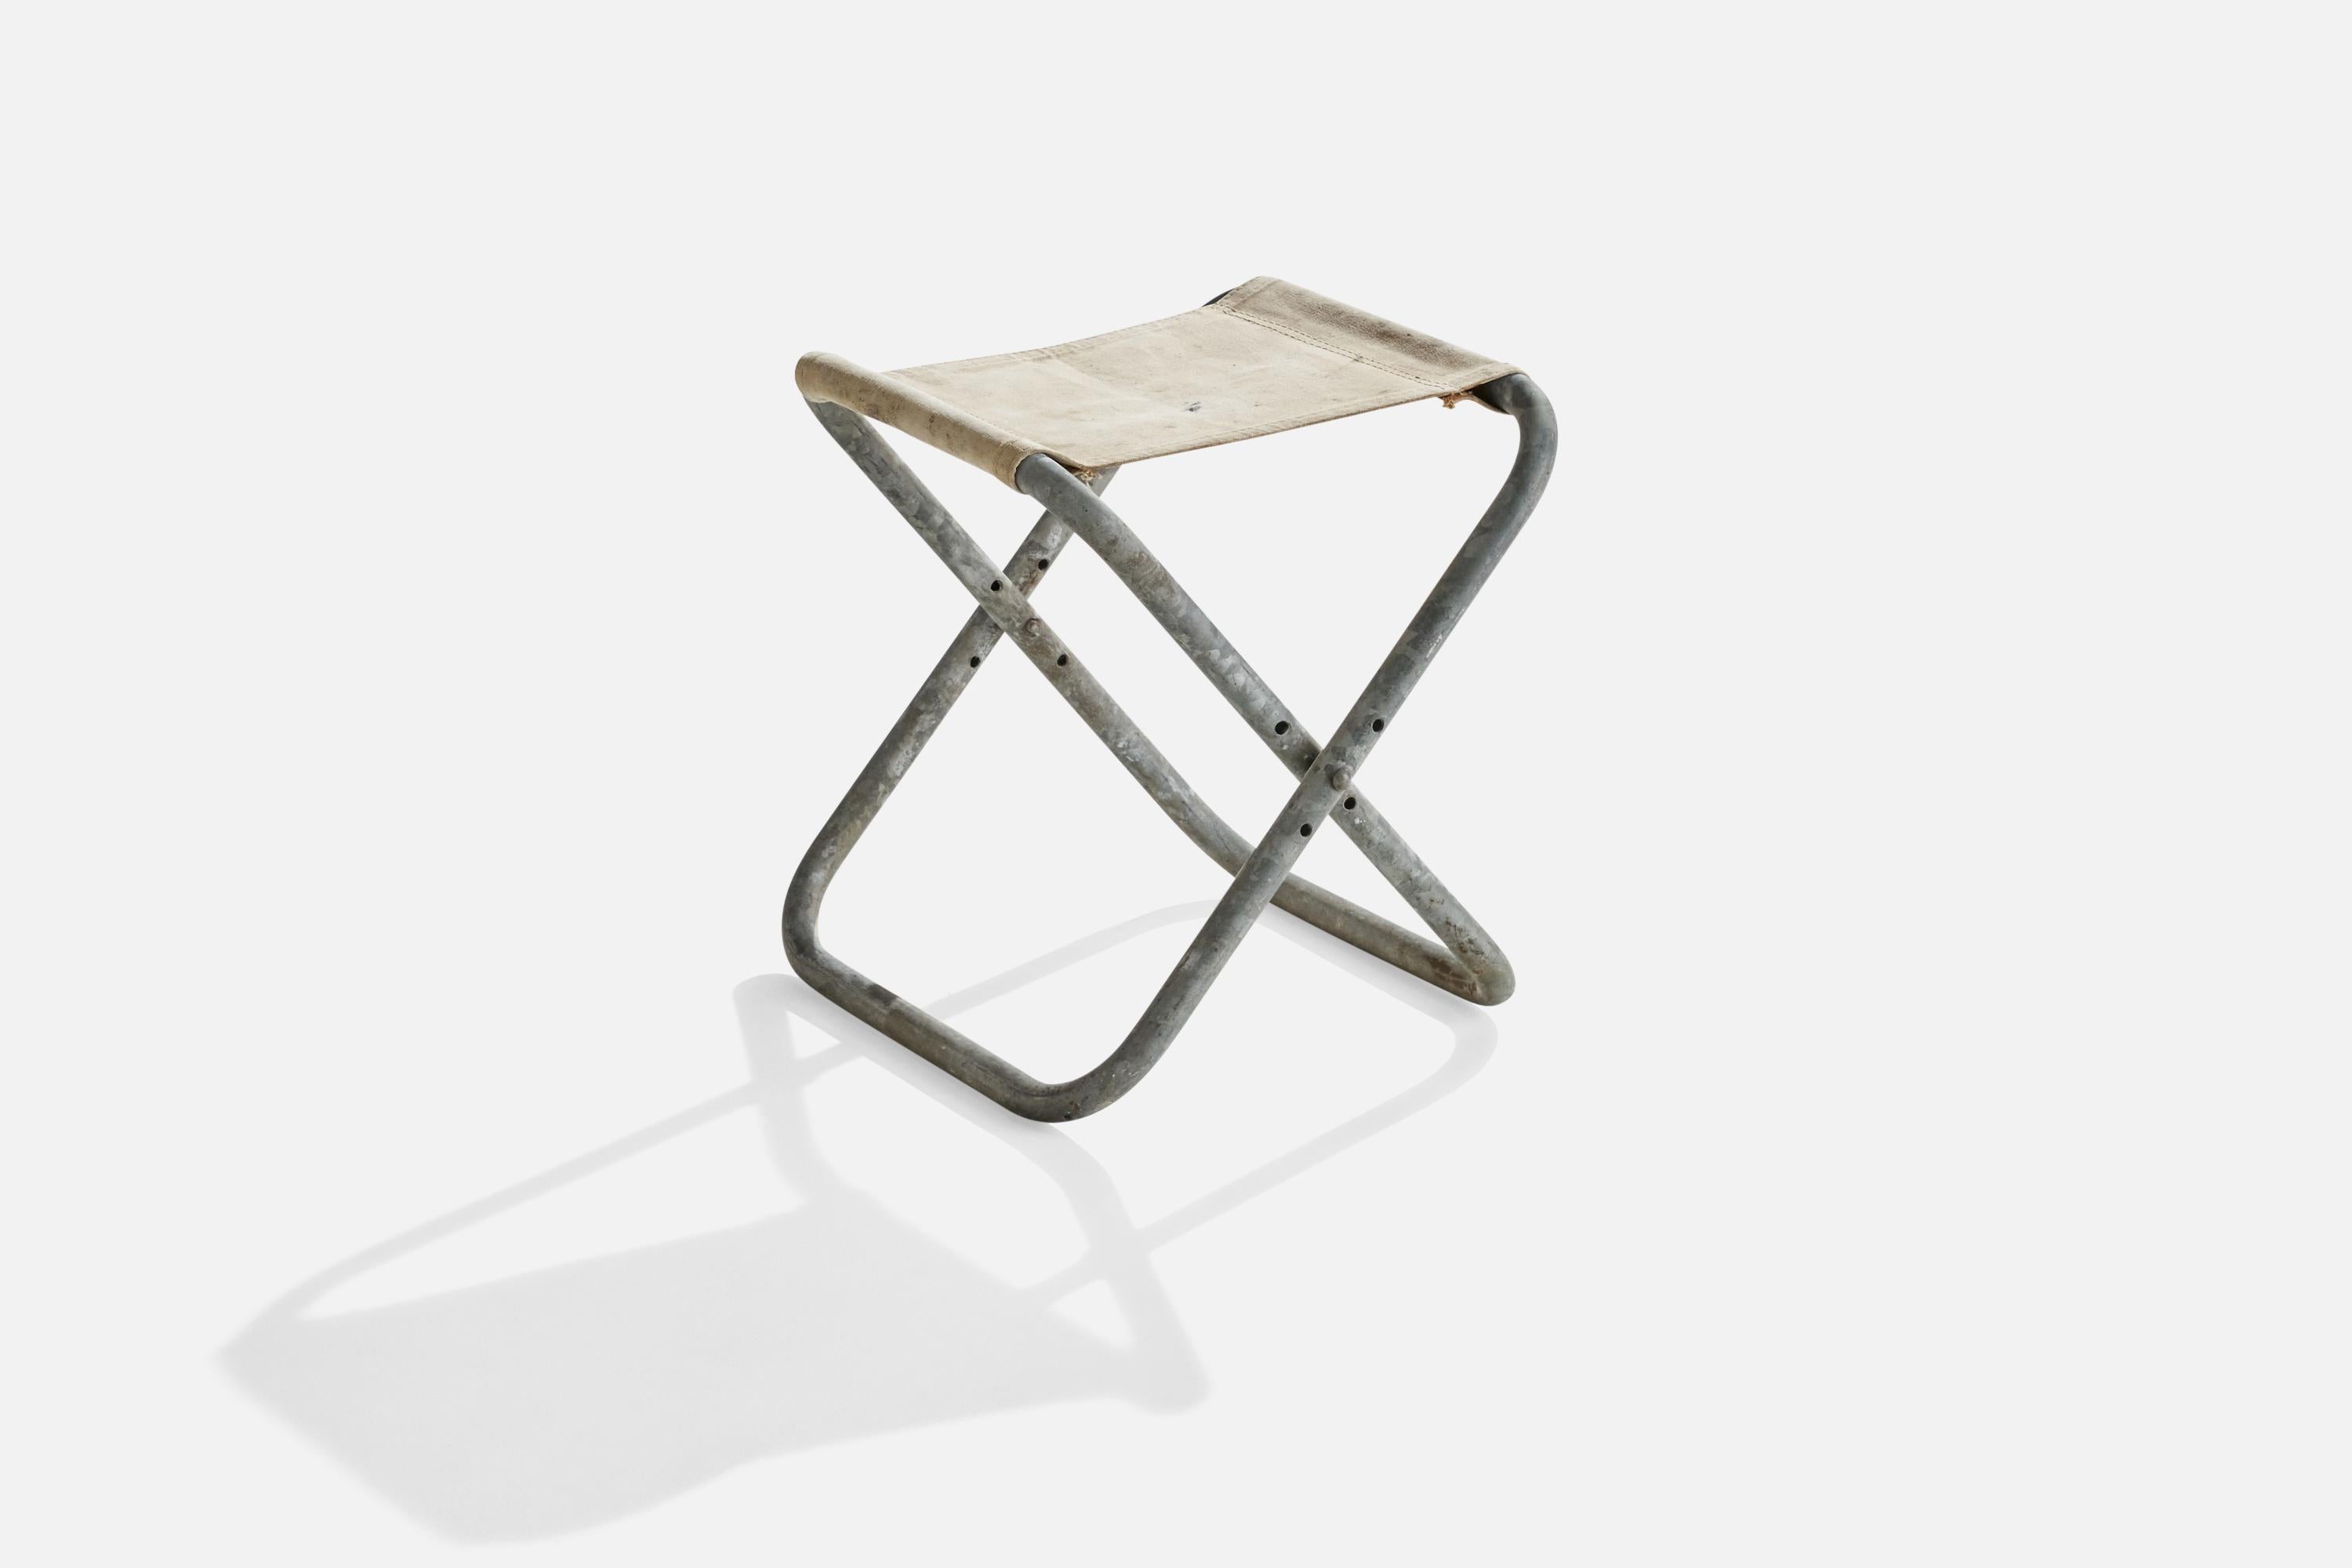 An off-white canvas and galvanized steel folding stool designed and produced in Denmark, c. 1940s.

seat height 15.75”.